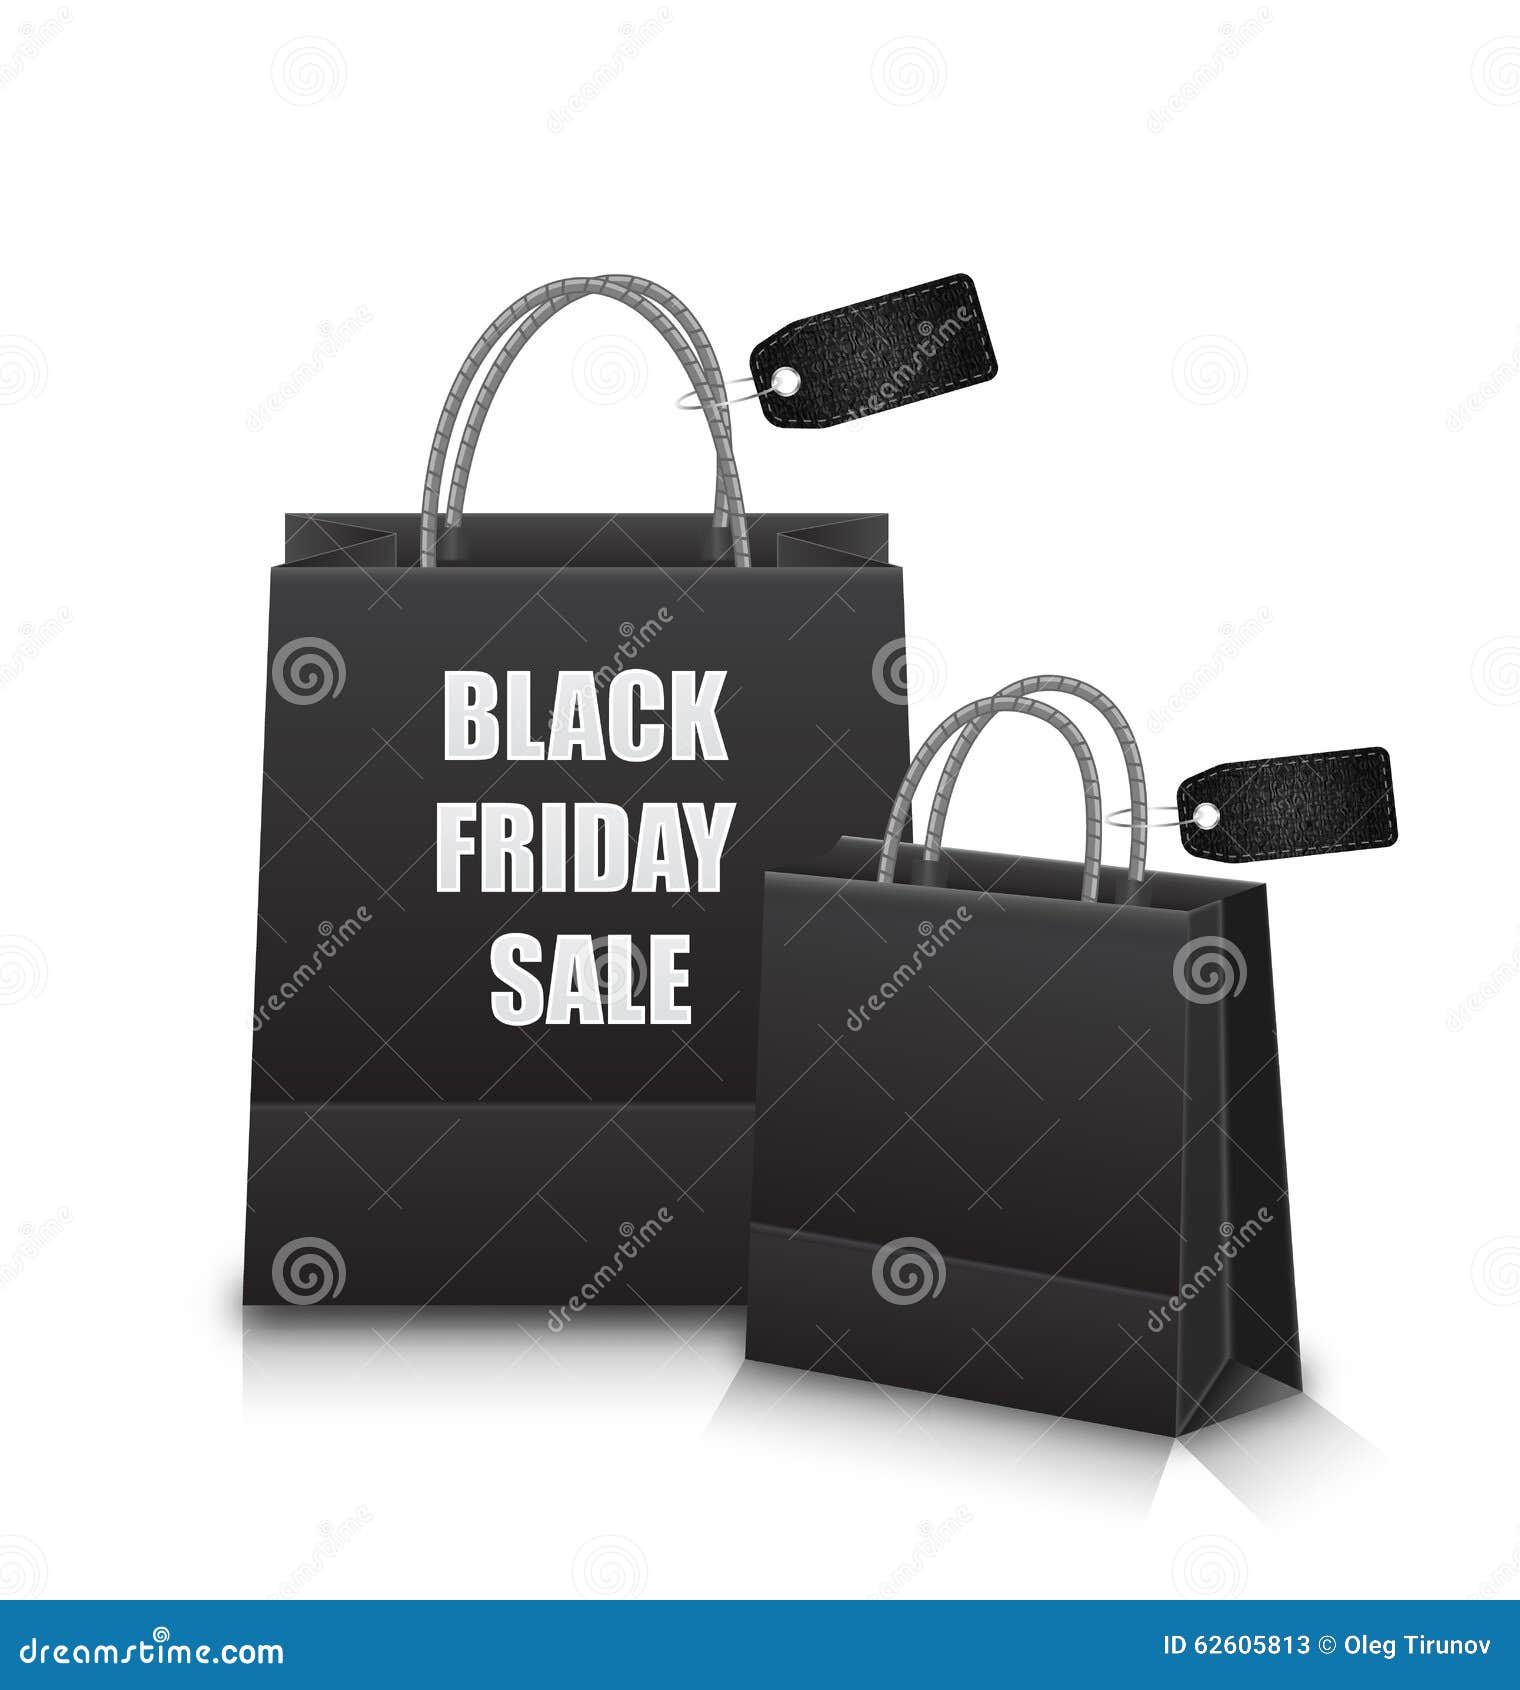 Sale Shopping Bags With Discount For Black Friday Stock Vector - Image: 62605813